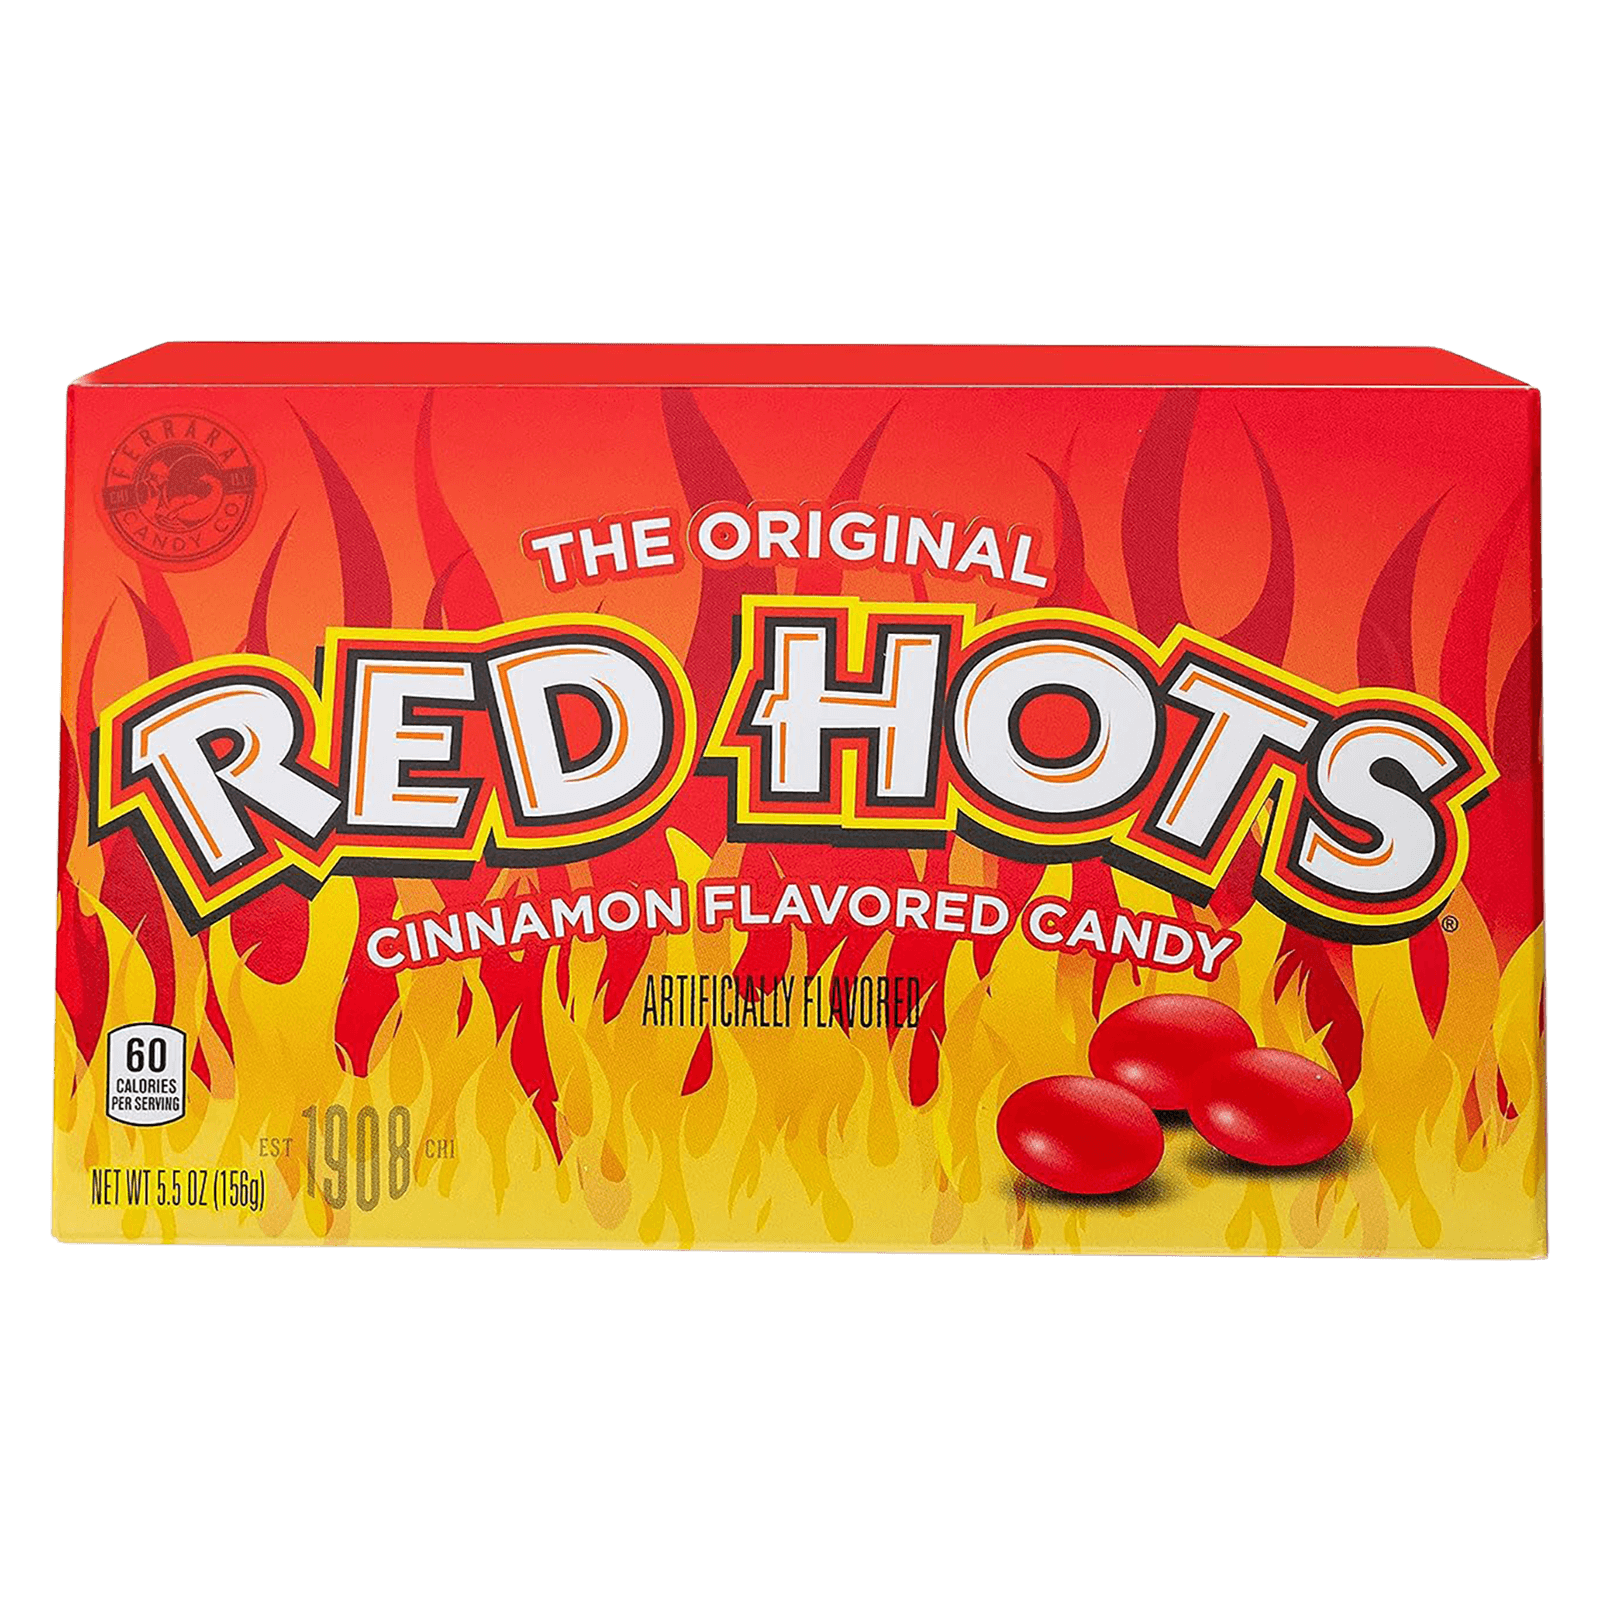 The Original - Red Hots Cinnamon Flavored Candy 156g